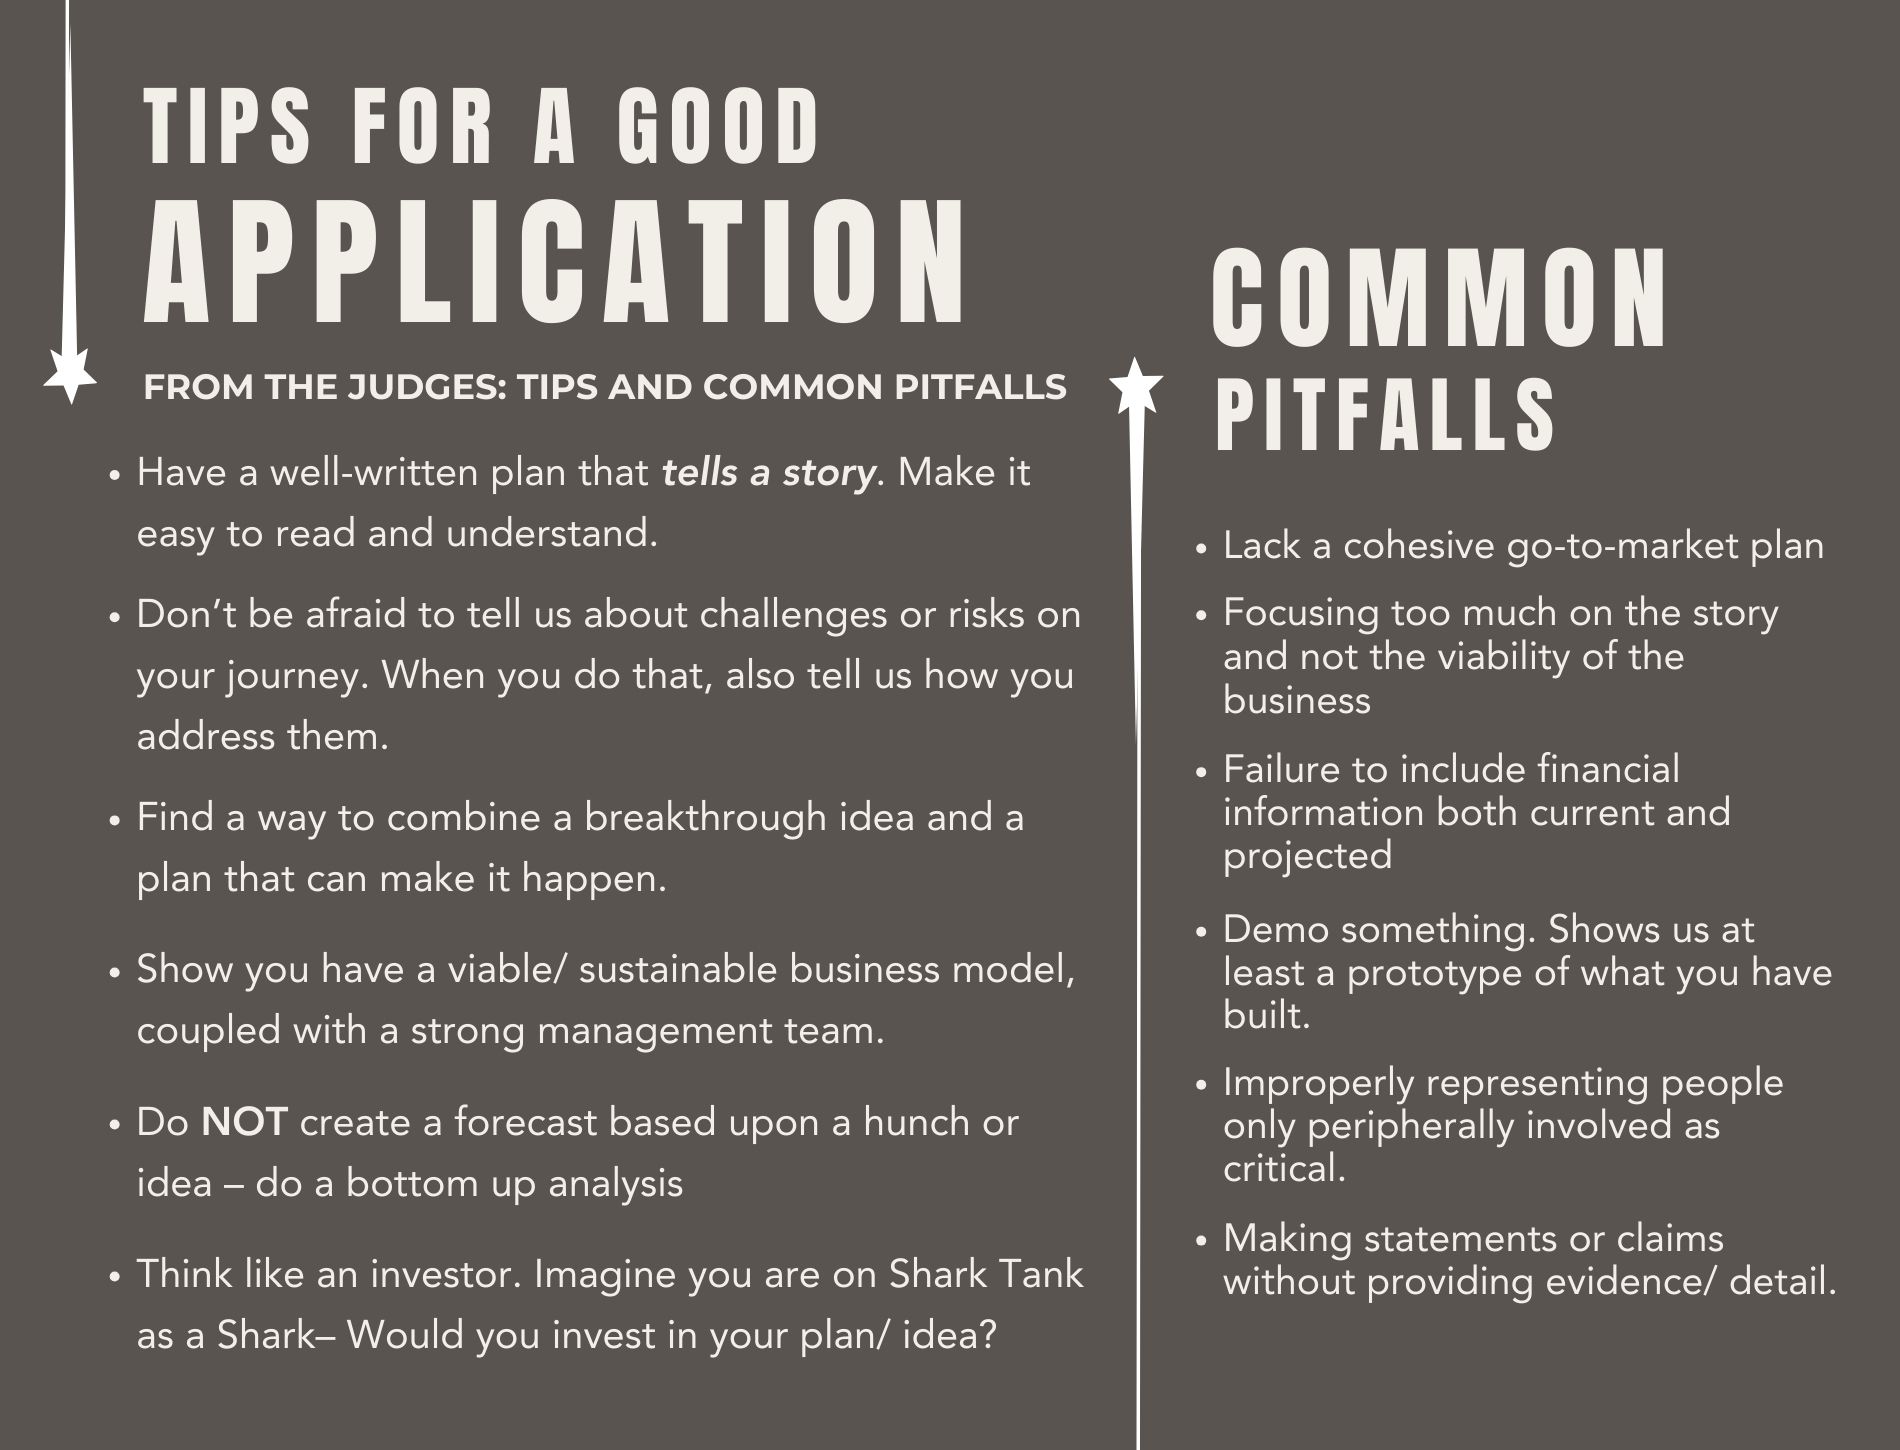 Tips for a Good Application